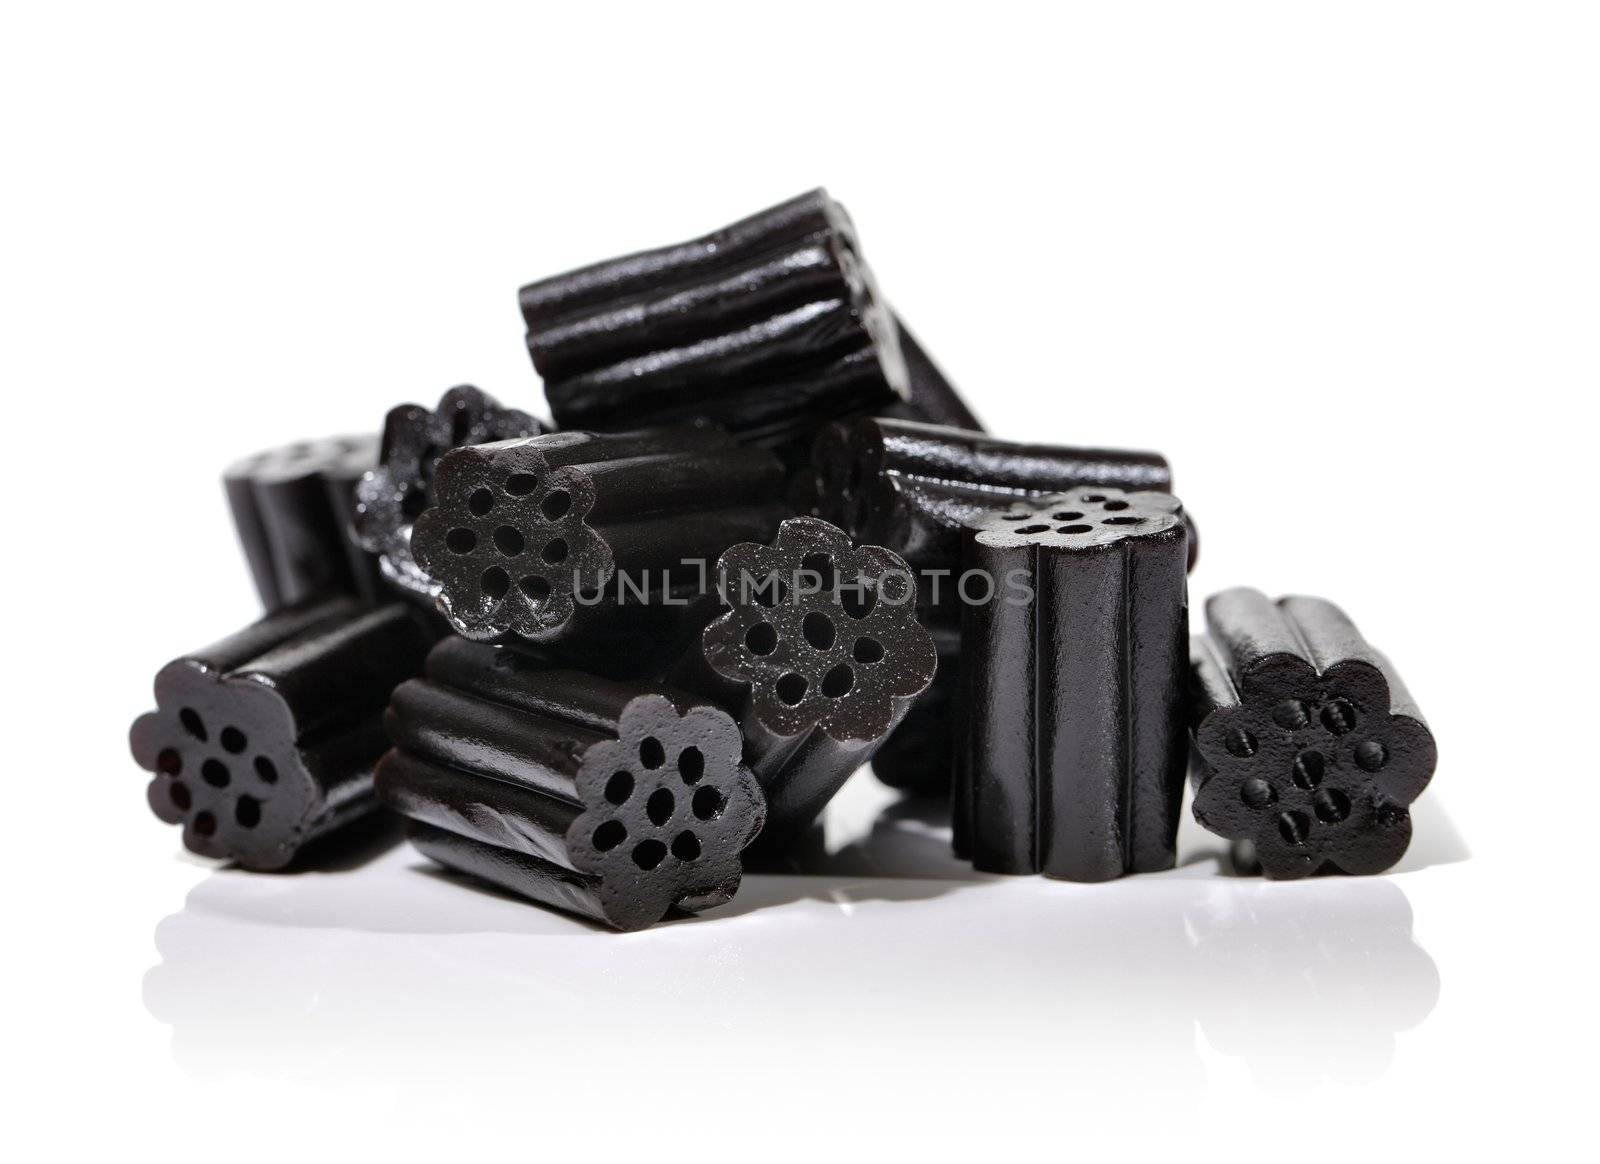 Liquorice by Stocksnapper